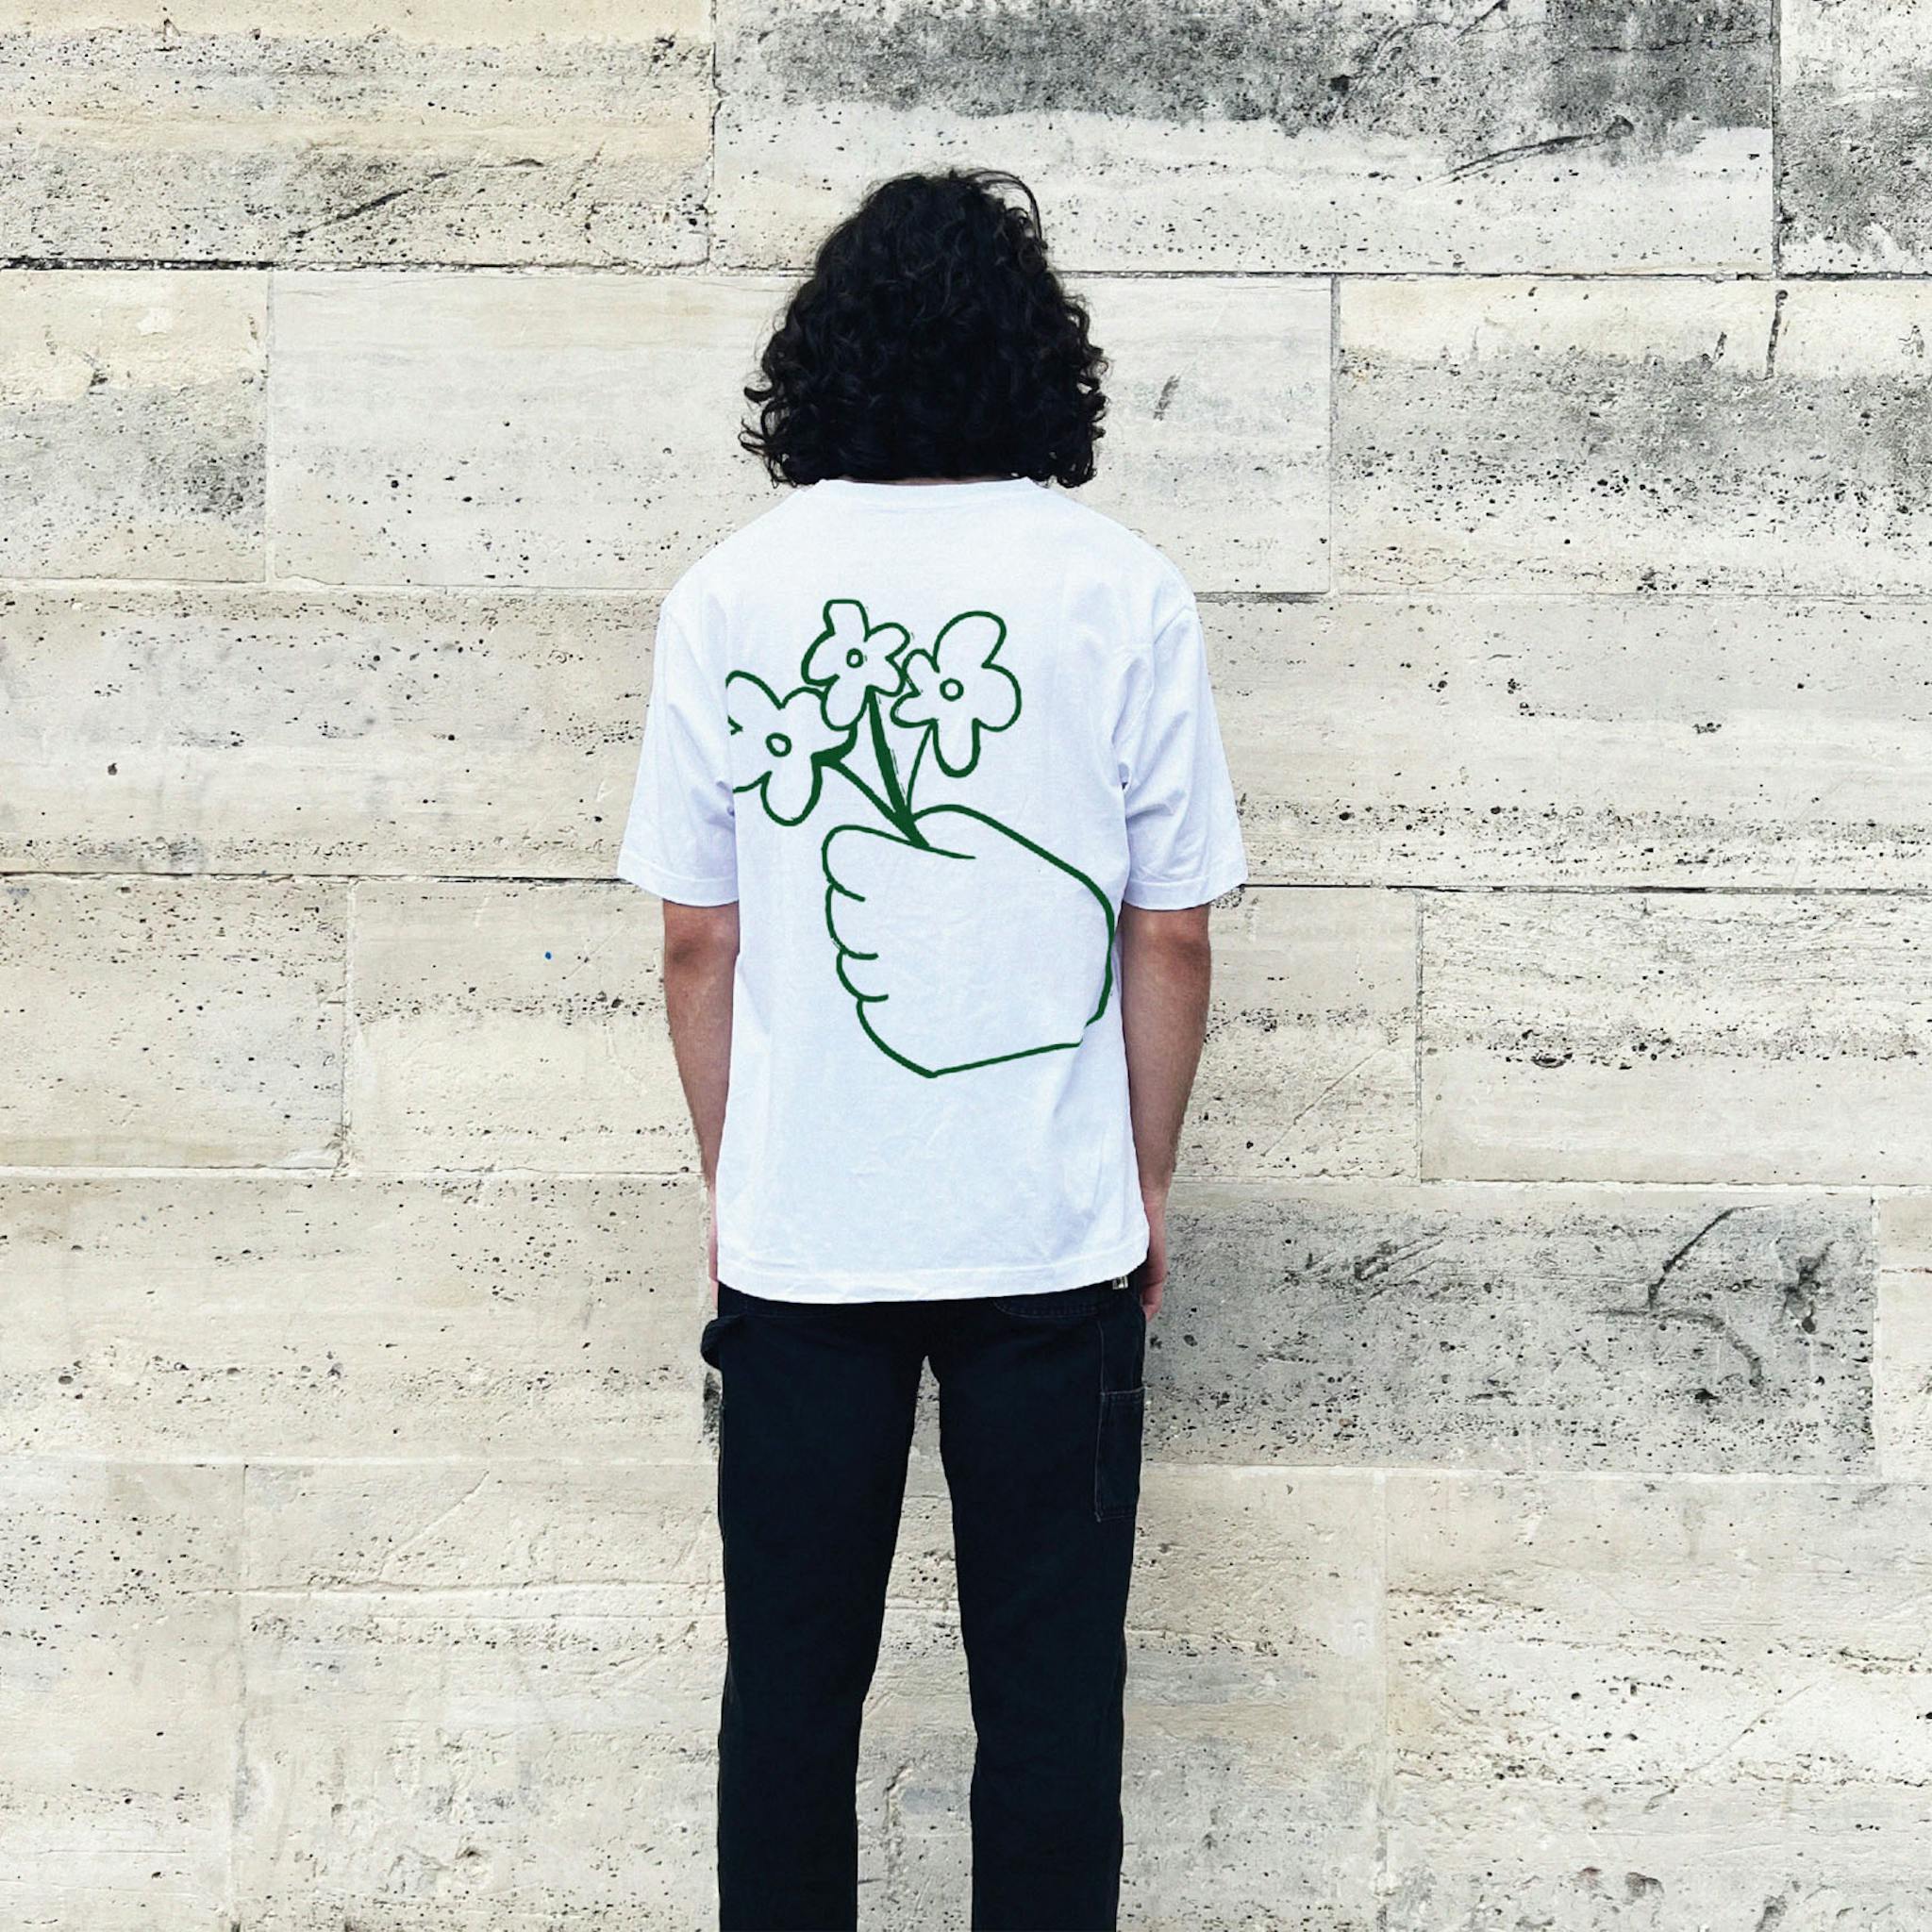 A man with long dark hair wearing a white T-shirt with a green outline drawing of a hand holding three flowers on the back.